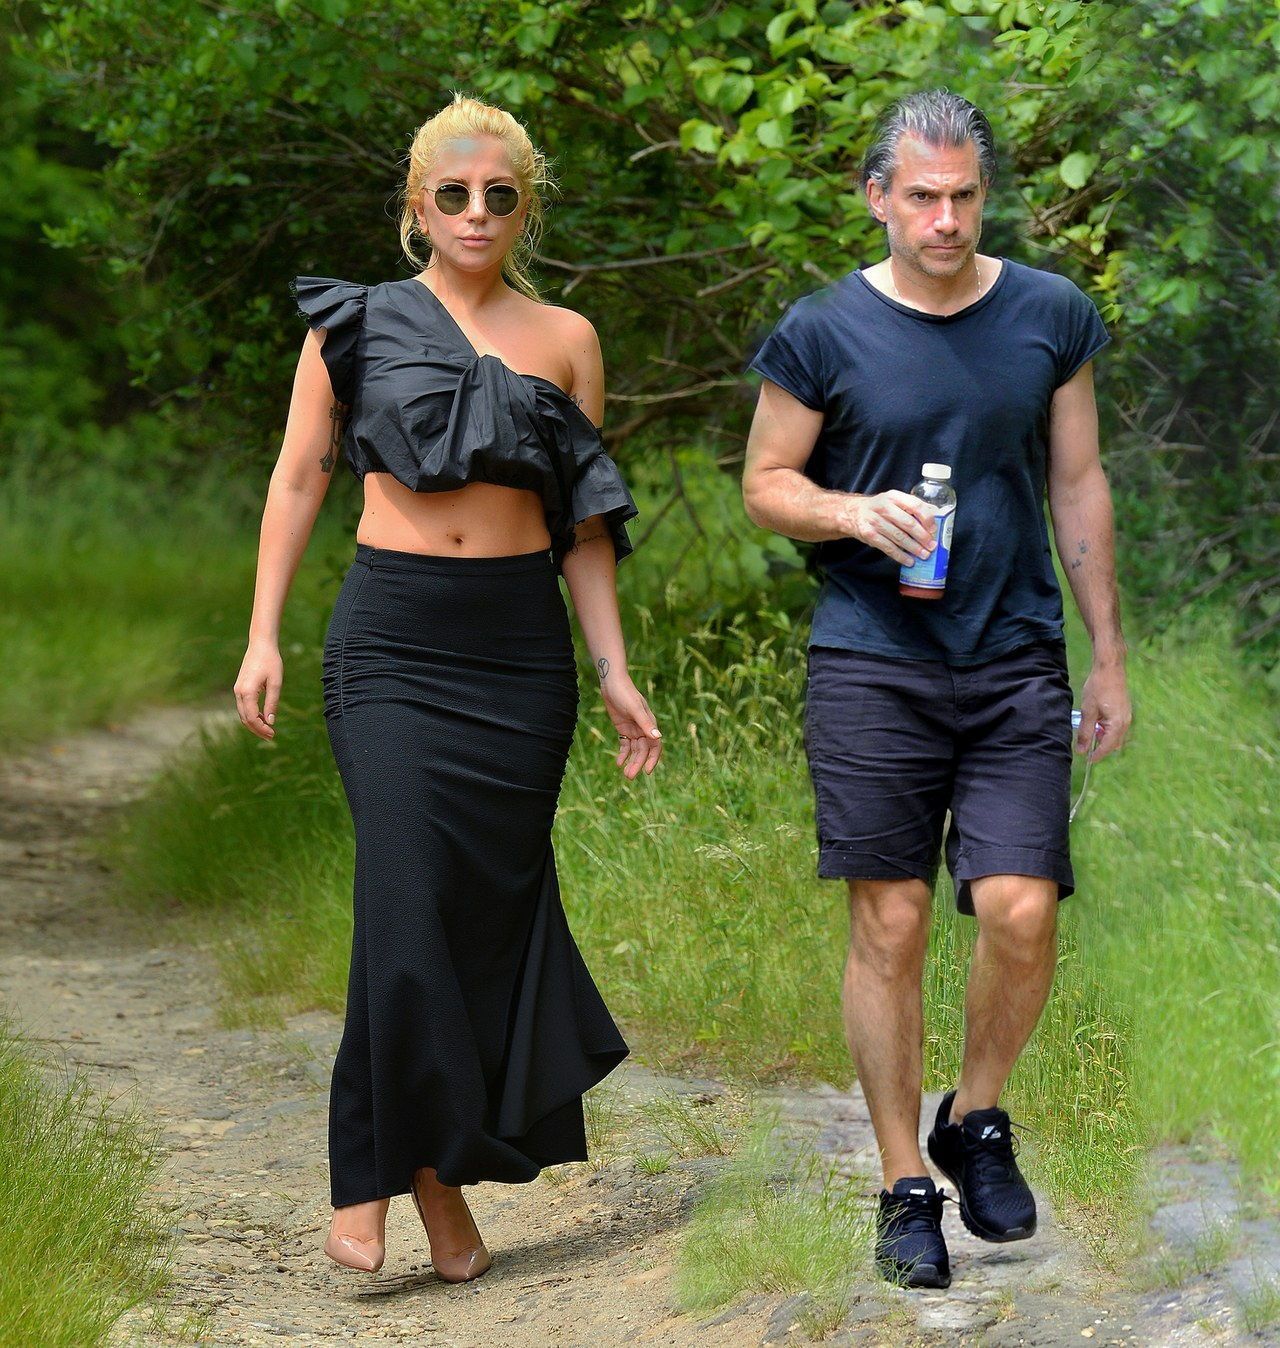 EXCLUSIVO: Lady Gaga maintains her personal style during a hike in the woods with her new boyfriend Christian Carino